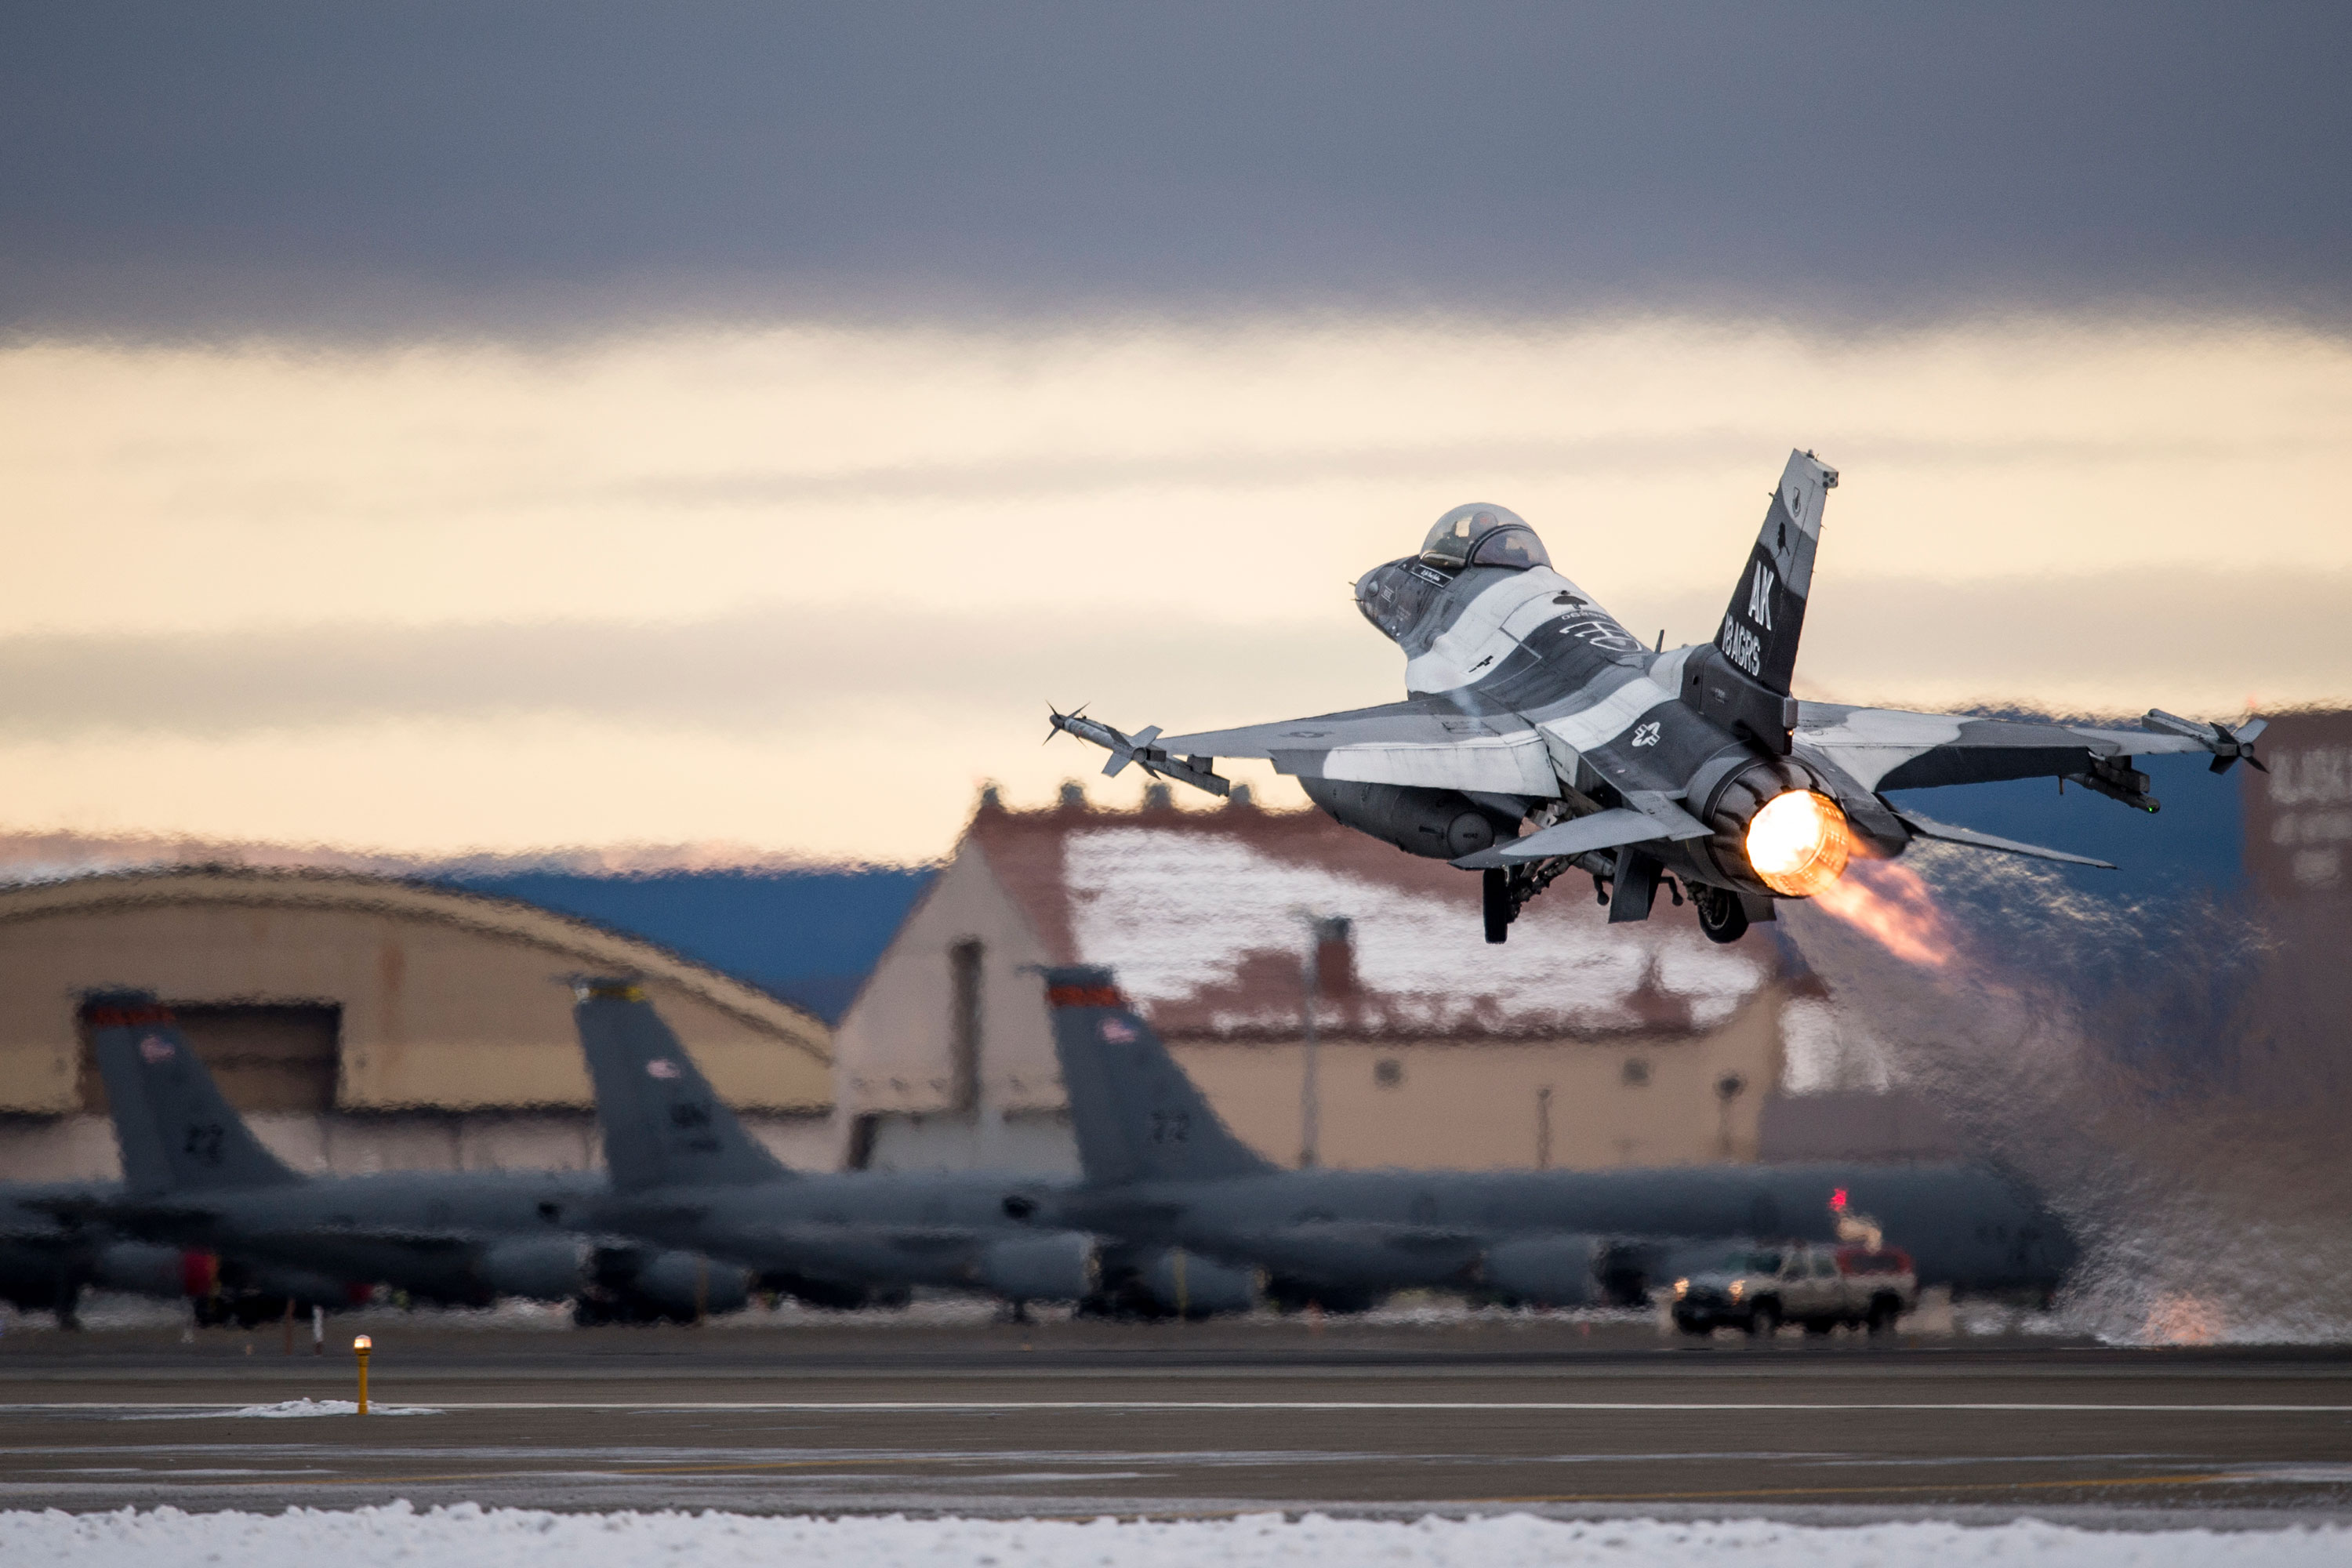 An aircraft takes off from a flightline